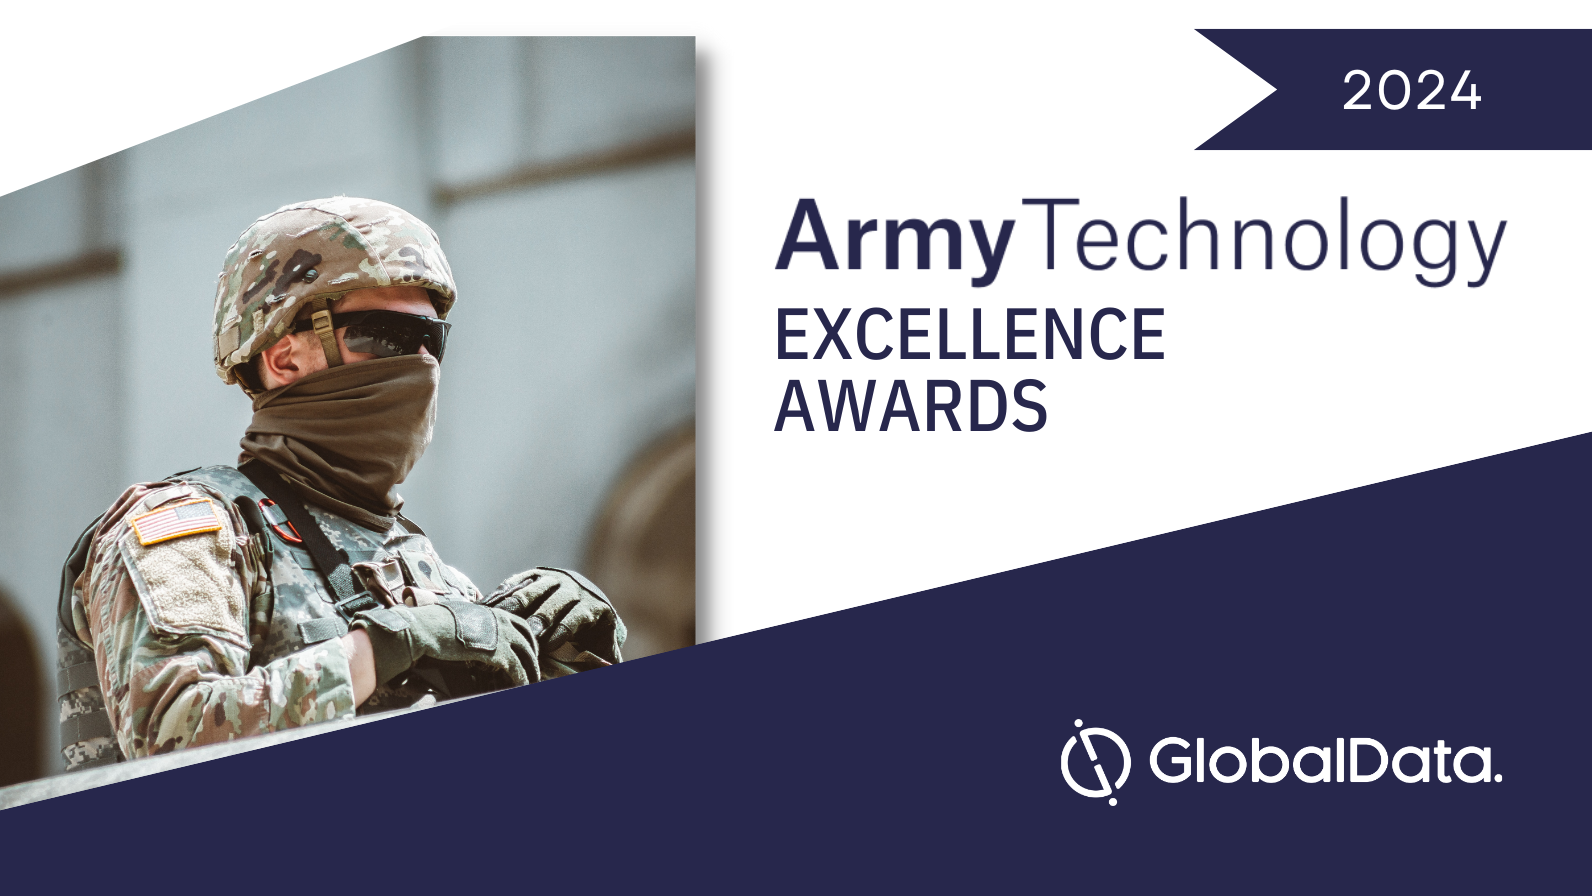 Introducing the Army Technology Excellence Awards 2024